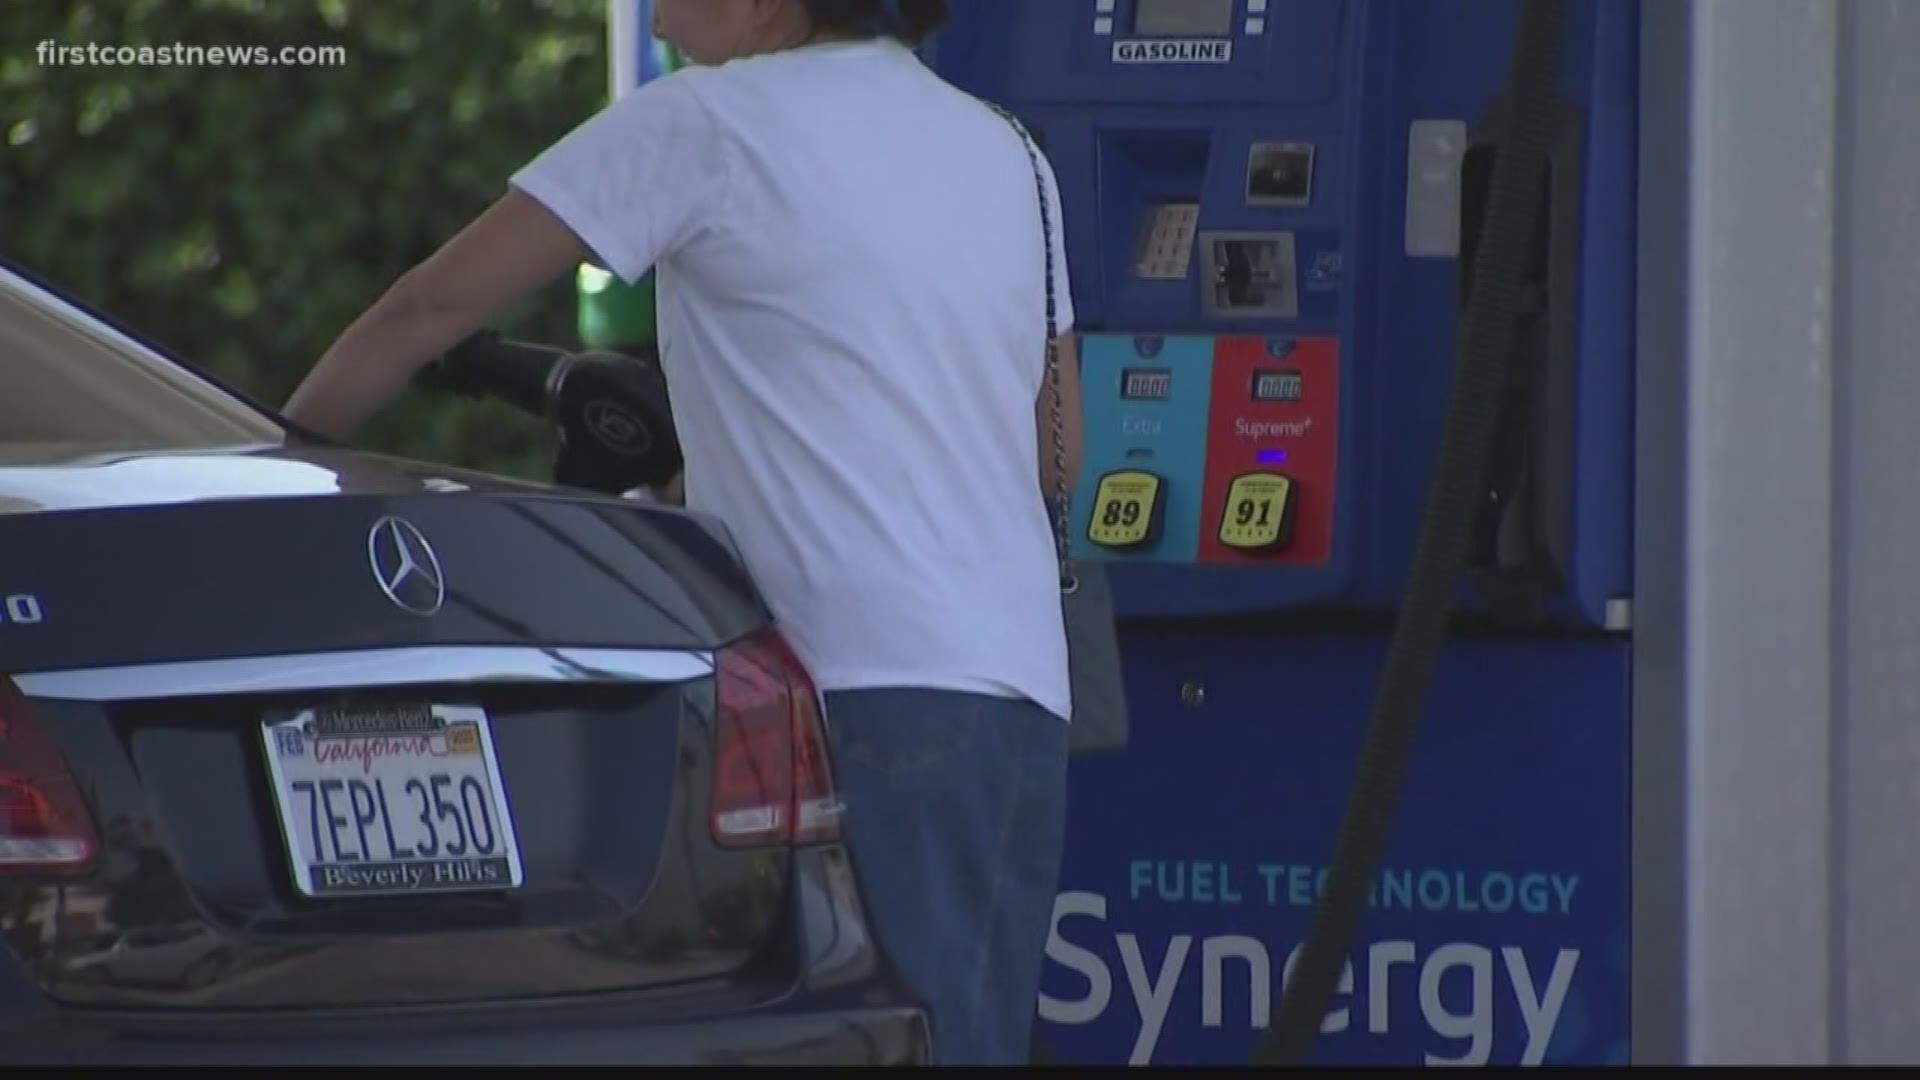 Let us know if you've seen low gas prices, and where, using #GMJ.